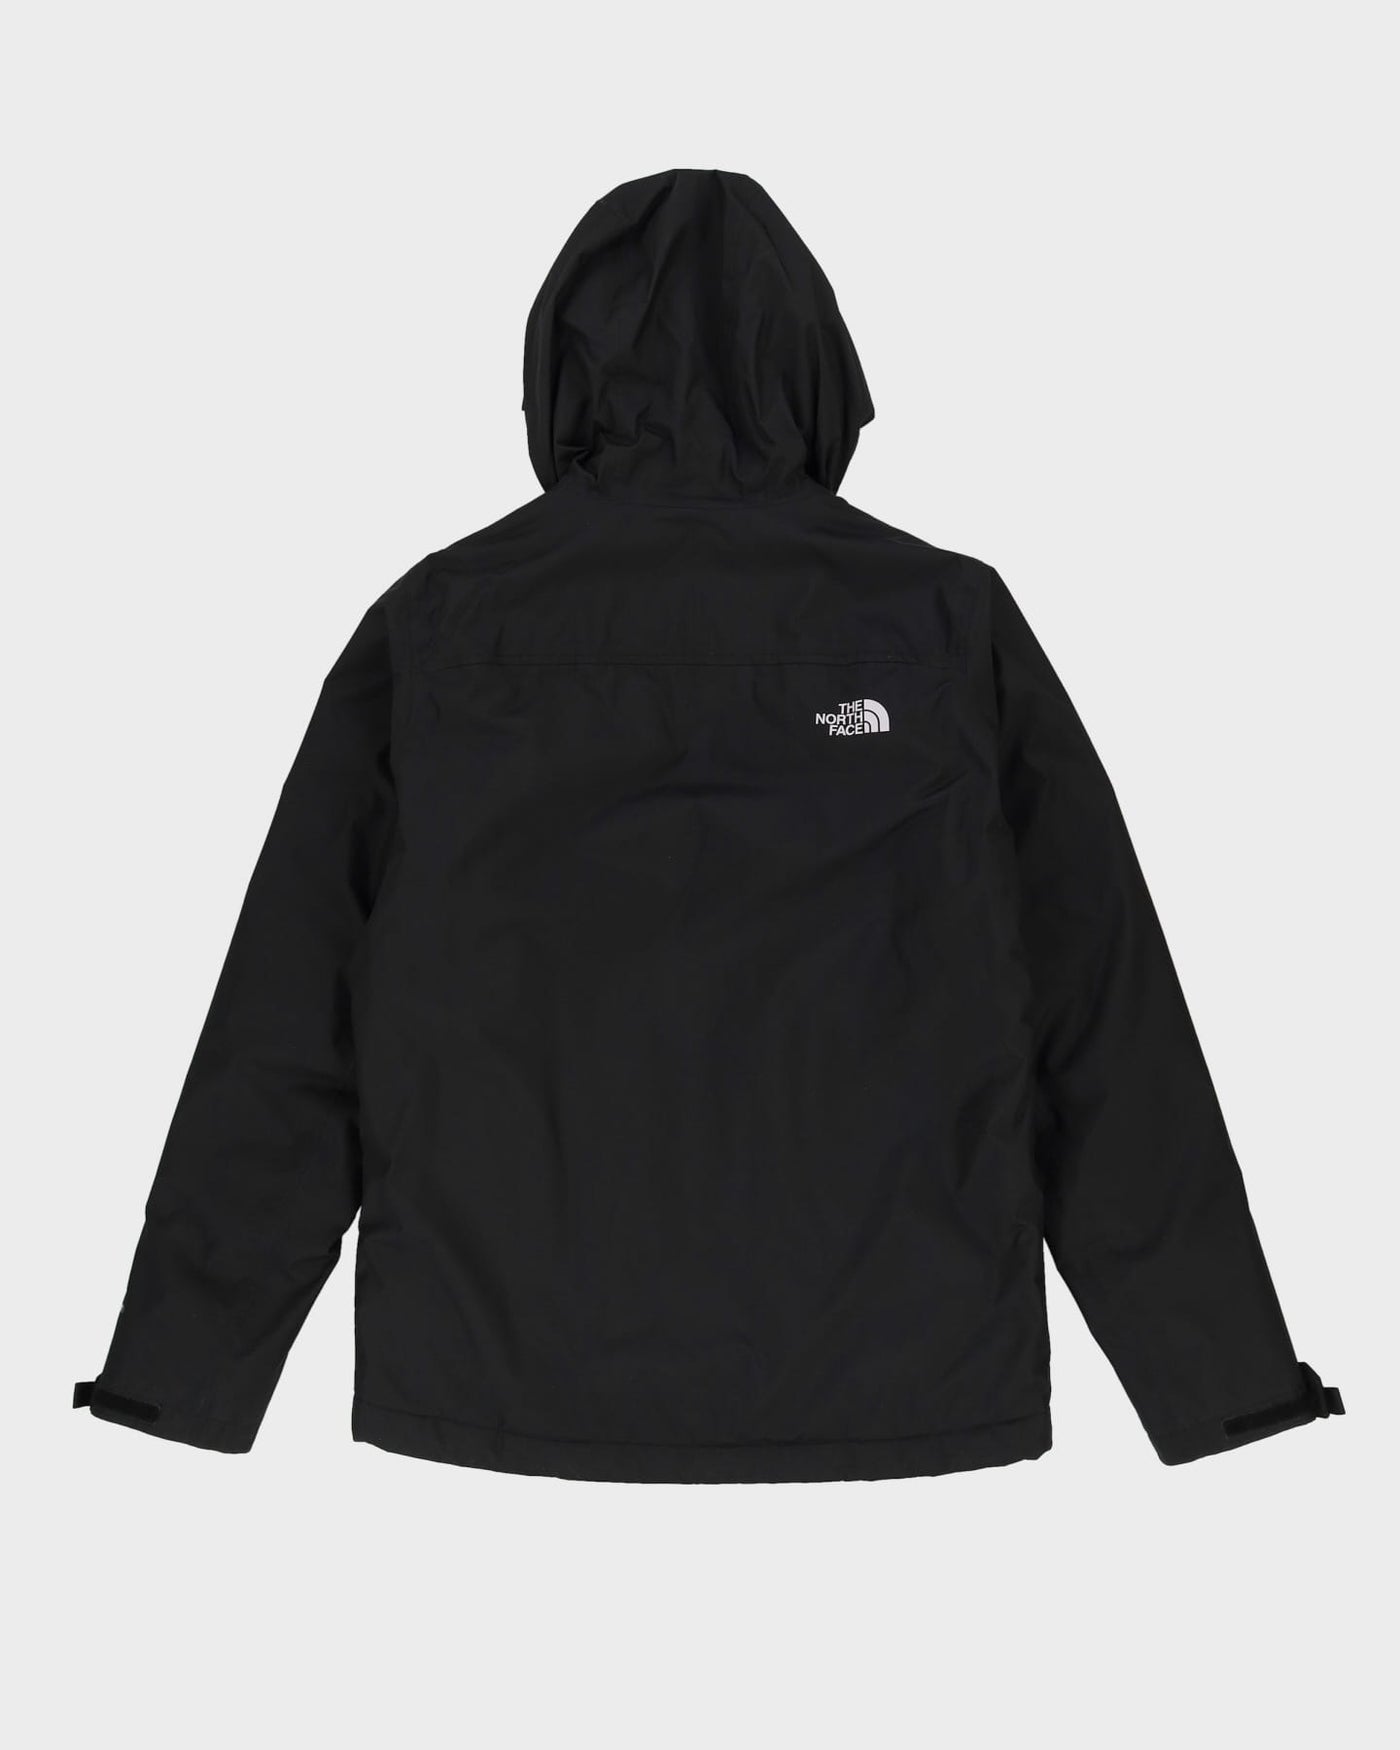 The North Face Black Dryvent Hooded Anorak Jacket - M